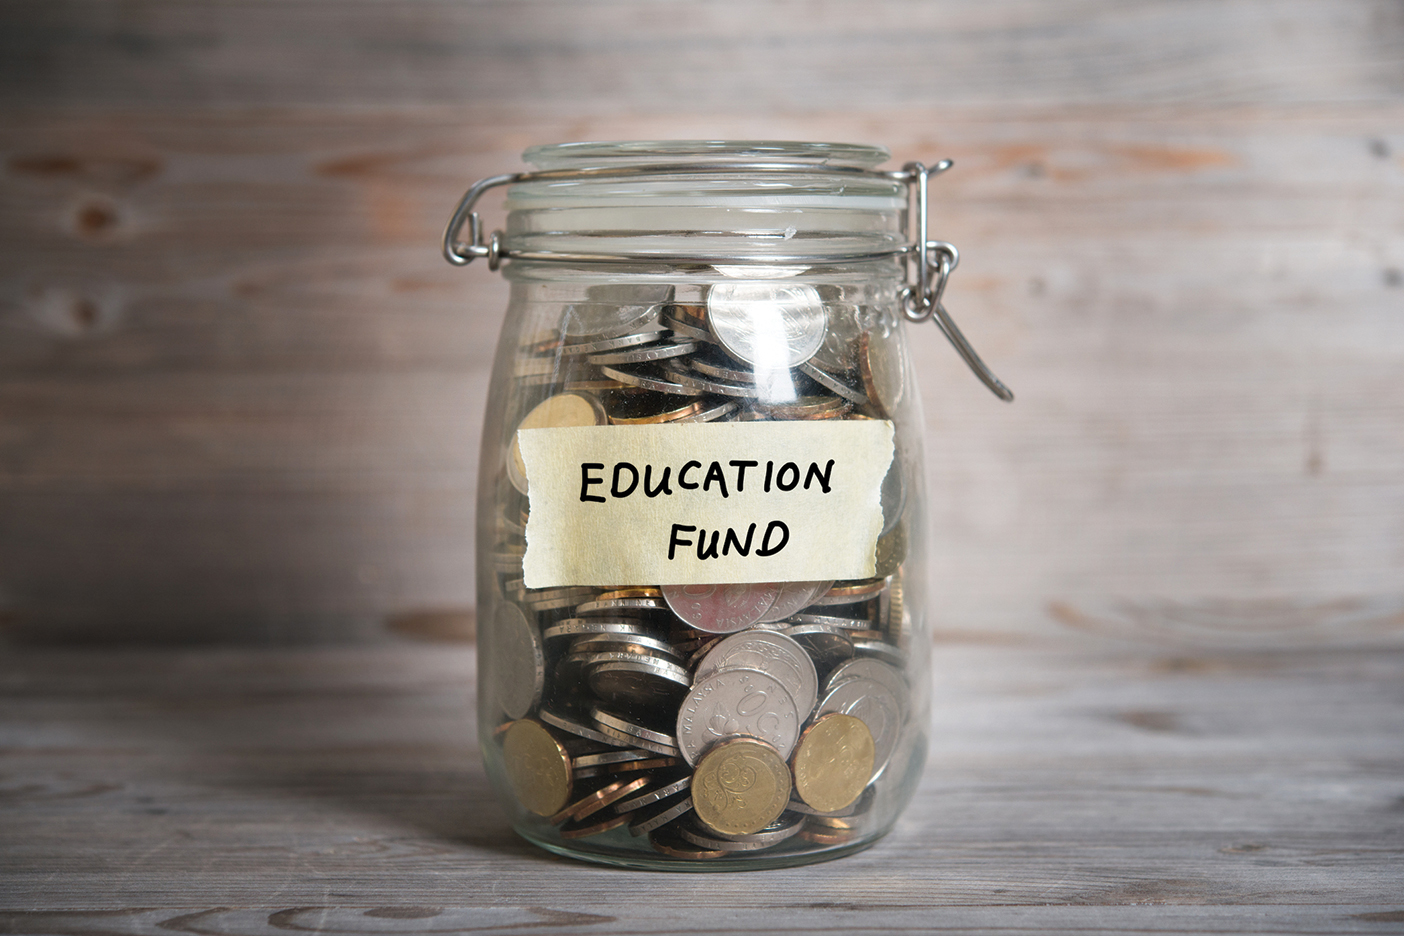 A jar filled with change and labeled "Education Fund"